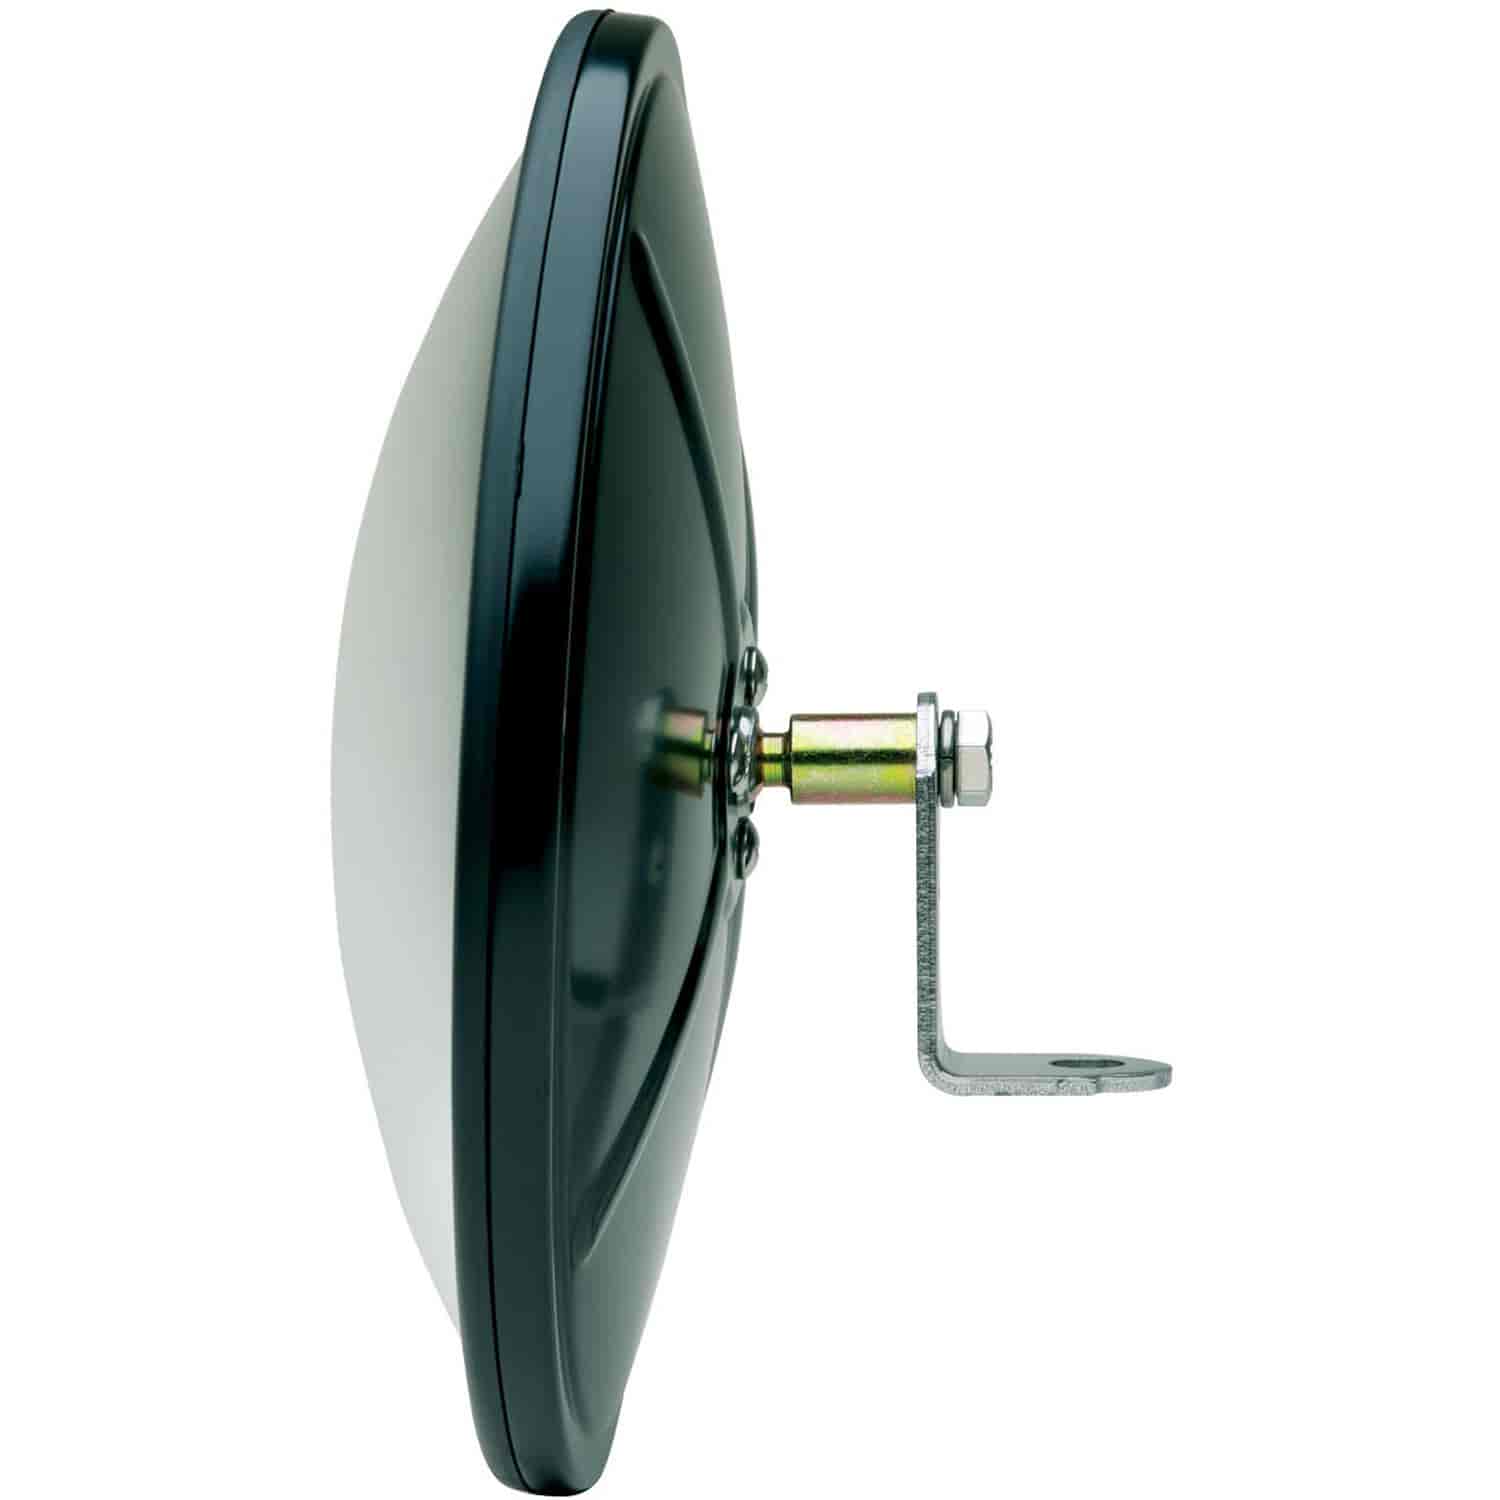 Clamp on Spot Mirror HD 8 1/2 round full bubble convex blk Easy Clamp-on Installation Convex Lens increases visibility.